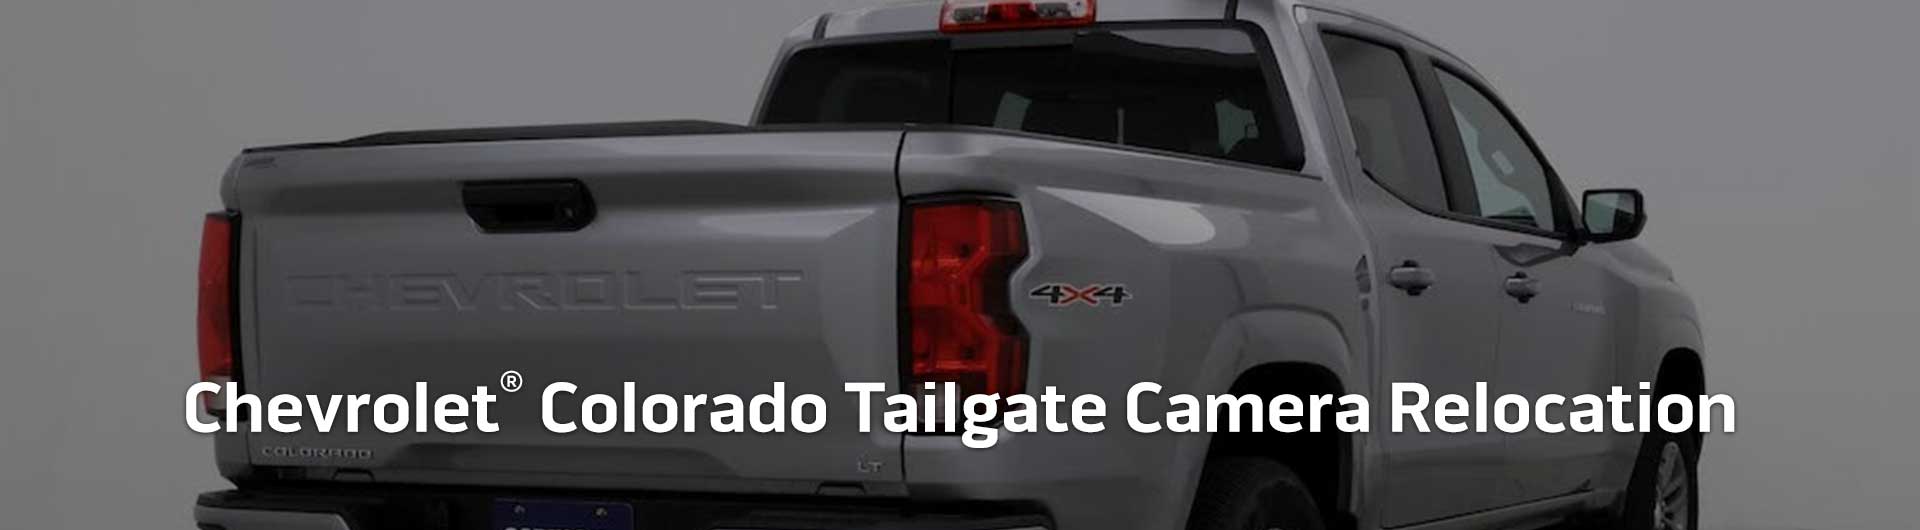 An image showing the tailgate of a Chevrolet Colorado truck. Text overlaid onto the image reads Chevrolet Colorado Tailgate Camera Relocation